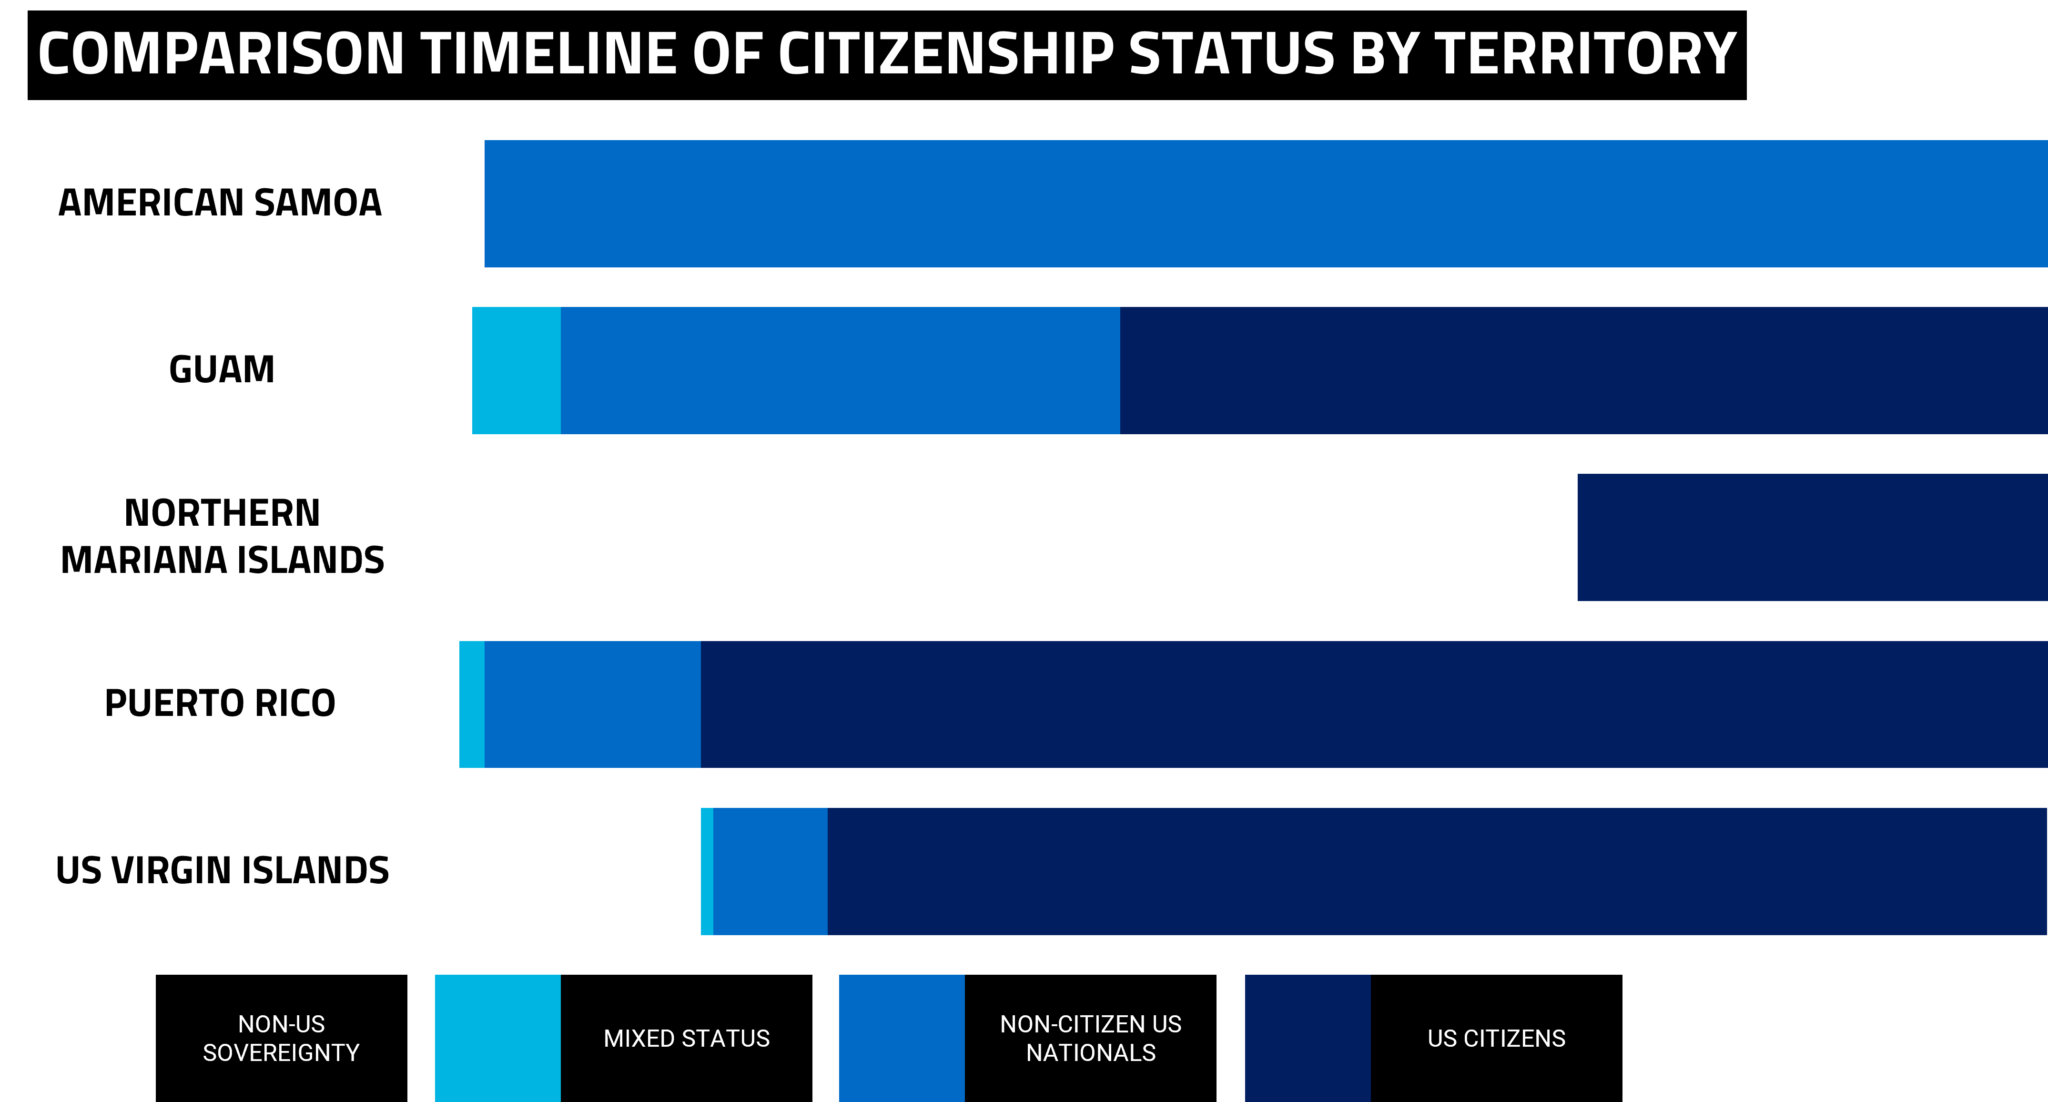 Comparison timeline of citizenship status by territory. Photo credit: Graph by Pasquines